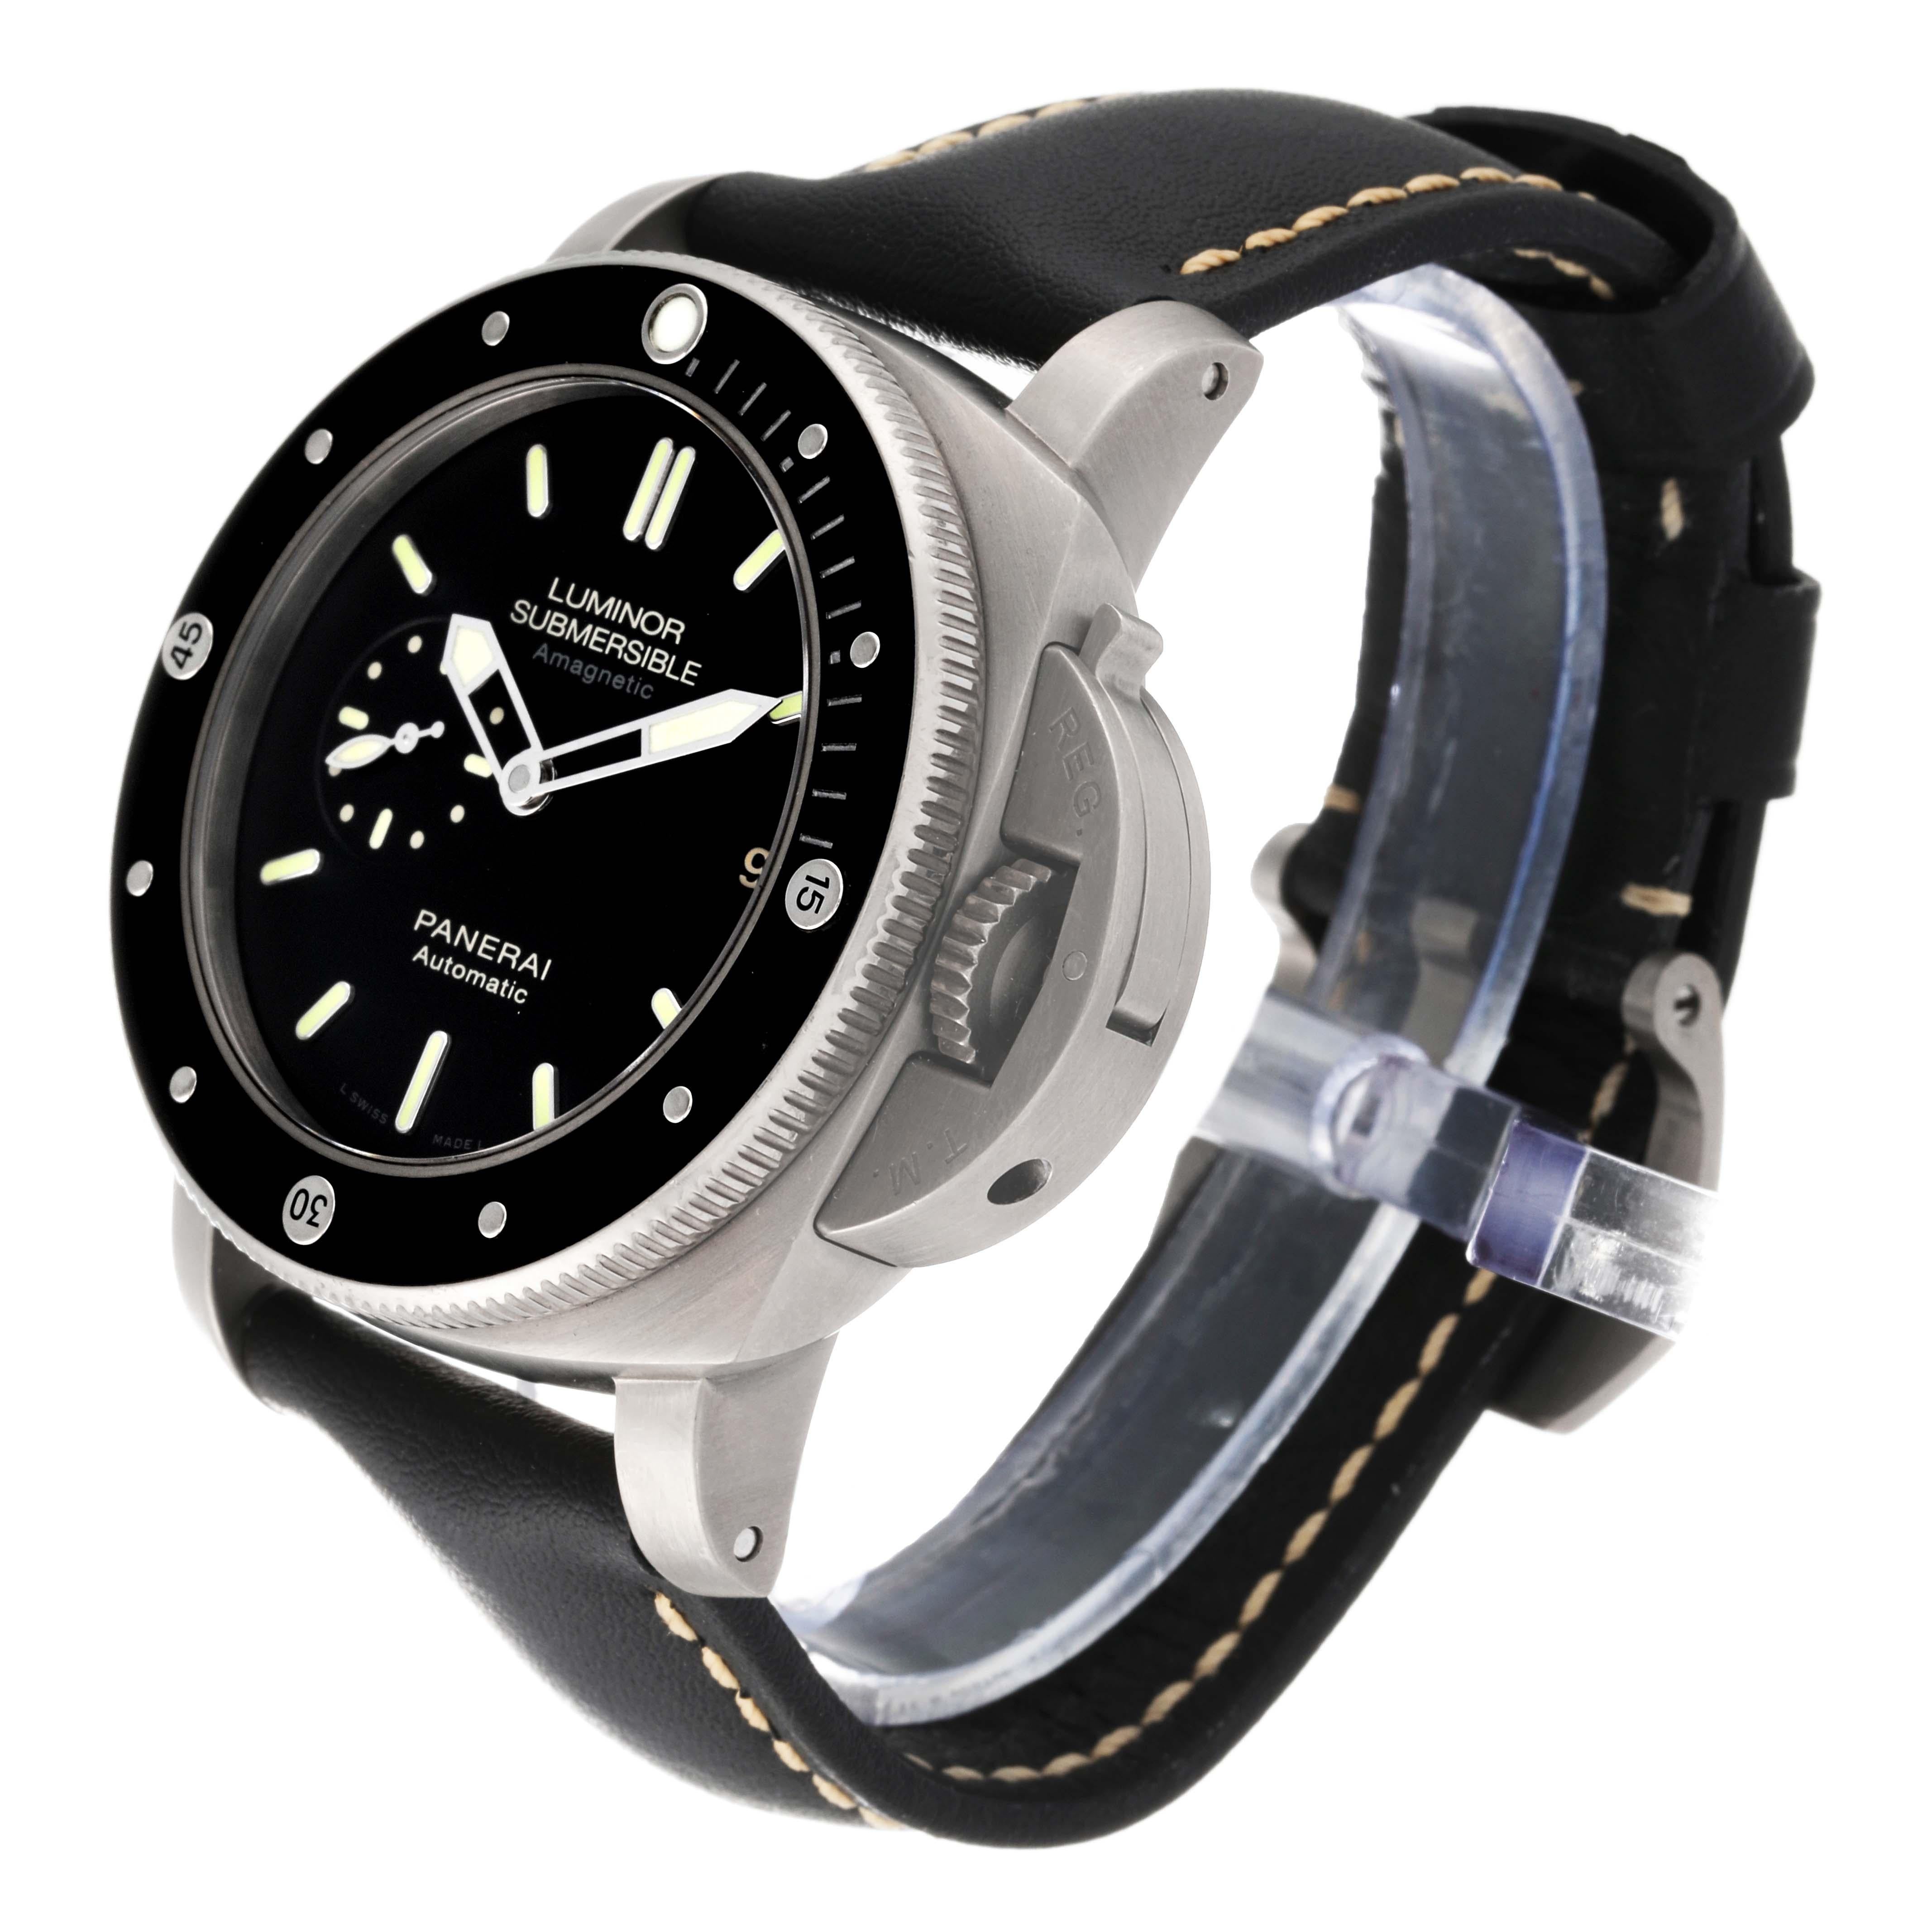 Panerai Luminor Submersible 1950 Titanium Amagnetic Watch PAM00389 Box Papers For Sale 1